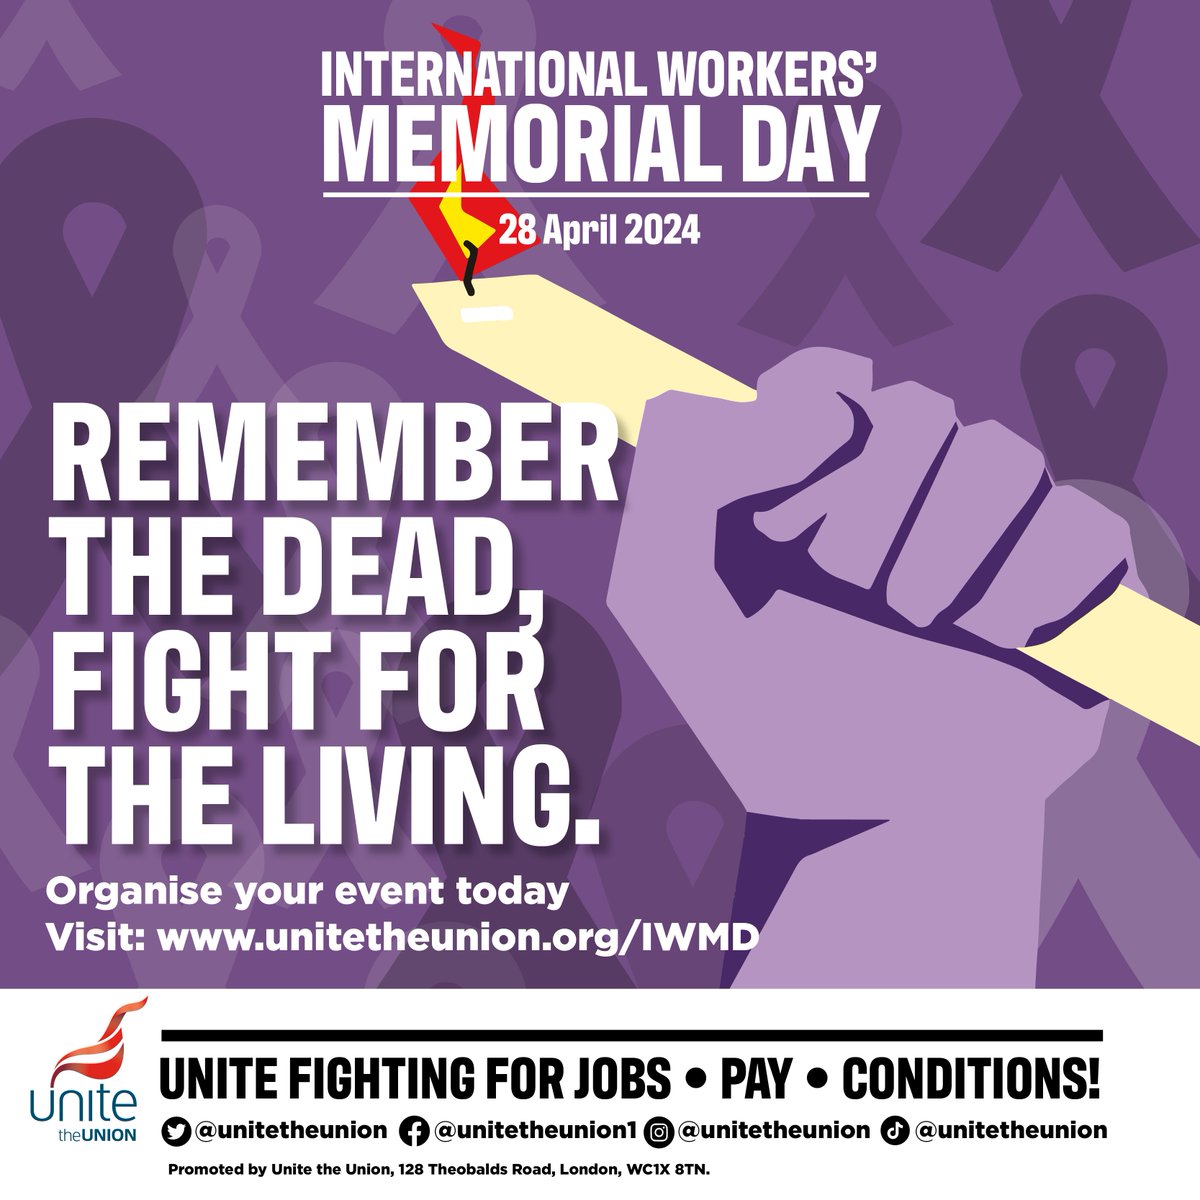 28 April is #IWMD24, the day we remember workers lost to workplace illness or injury. Organise and participate in #IWMD24 events as Unite recommits to fighting to keep workers safe. Remember the Dead, Fight for the Living.